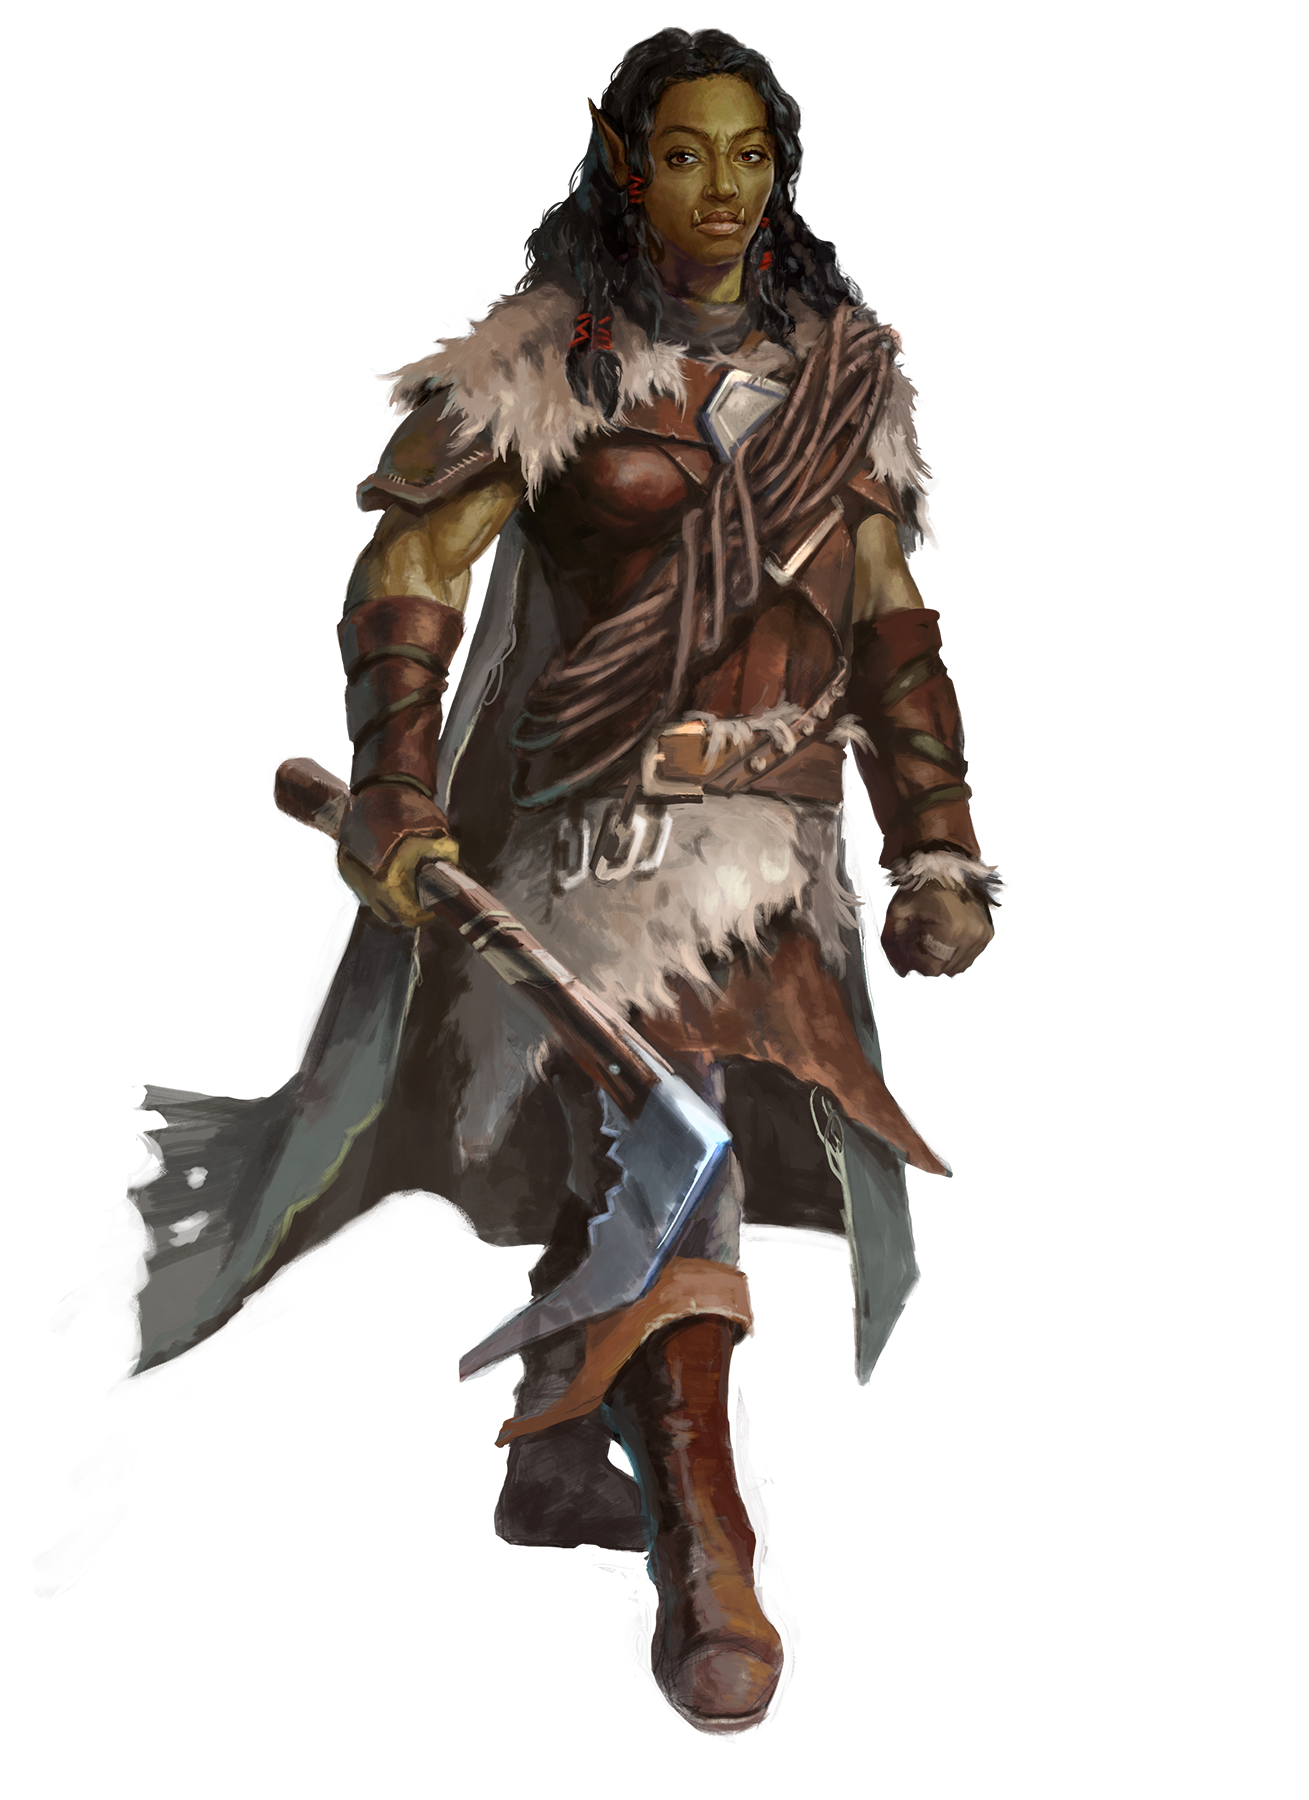 Dromaar Mountaineer dressed in furs and leather, holding an axe in her hand